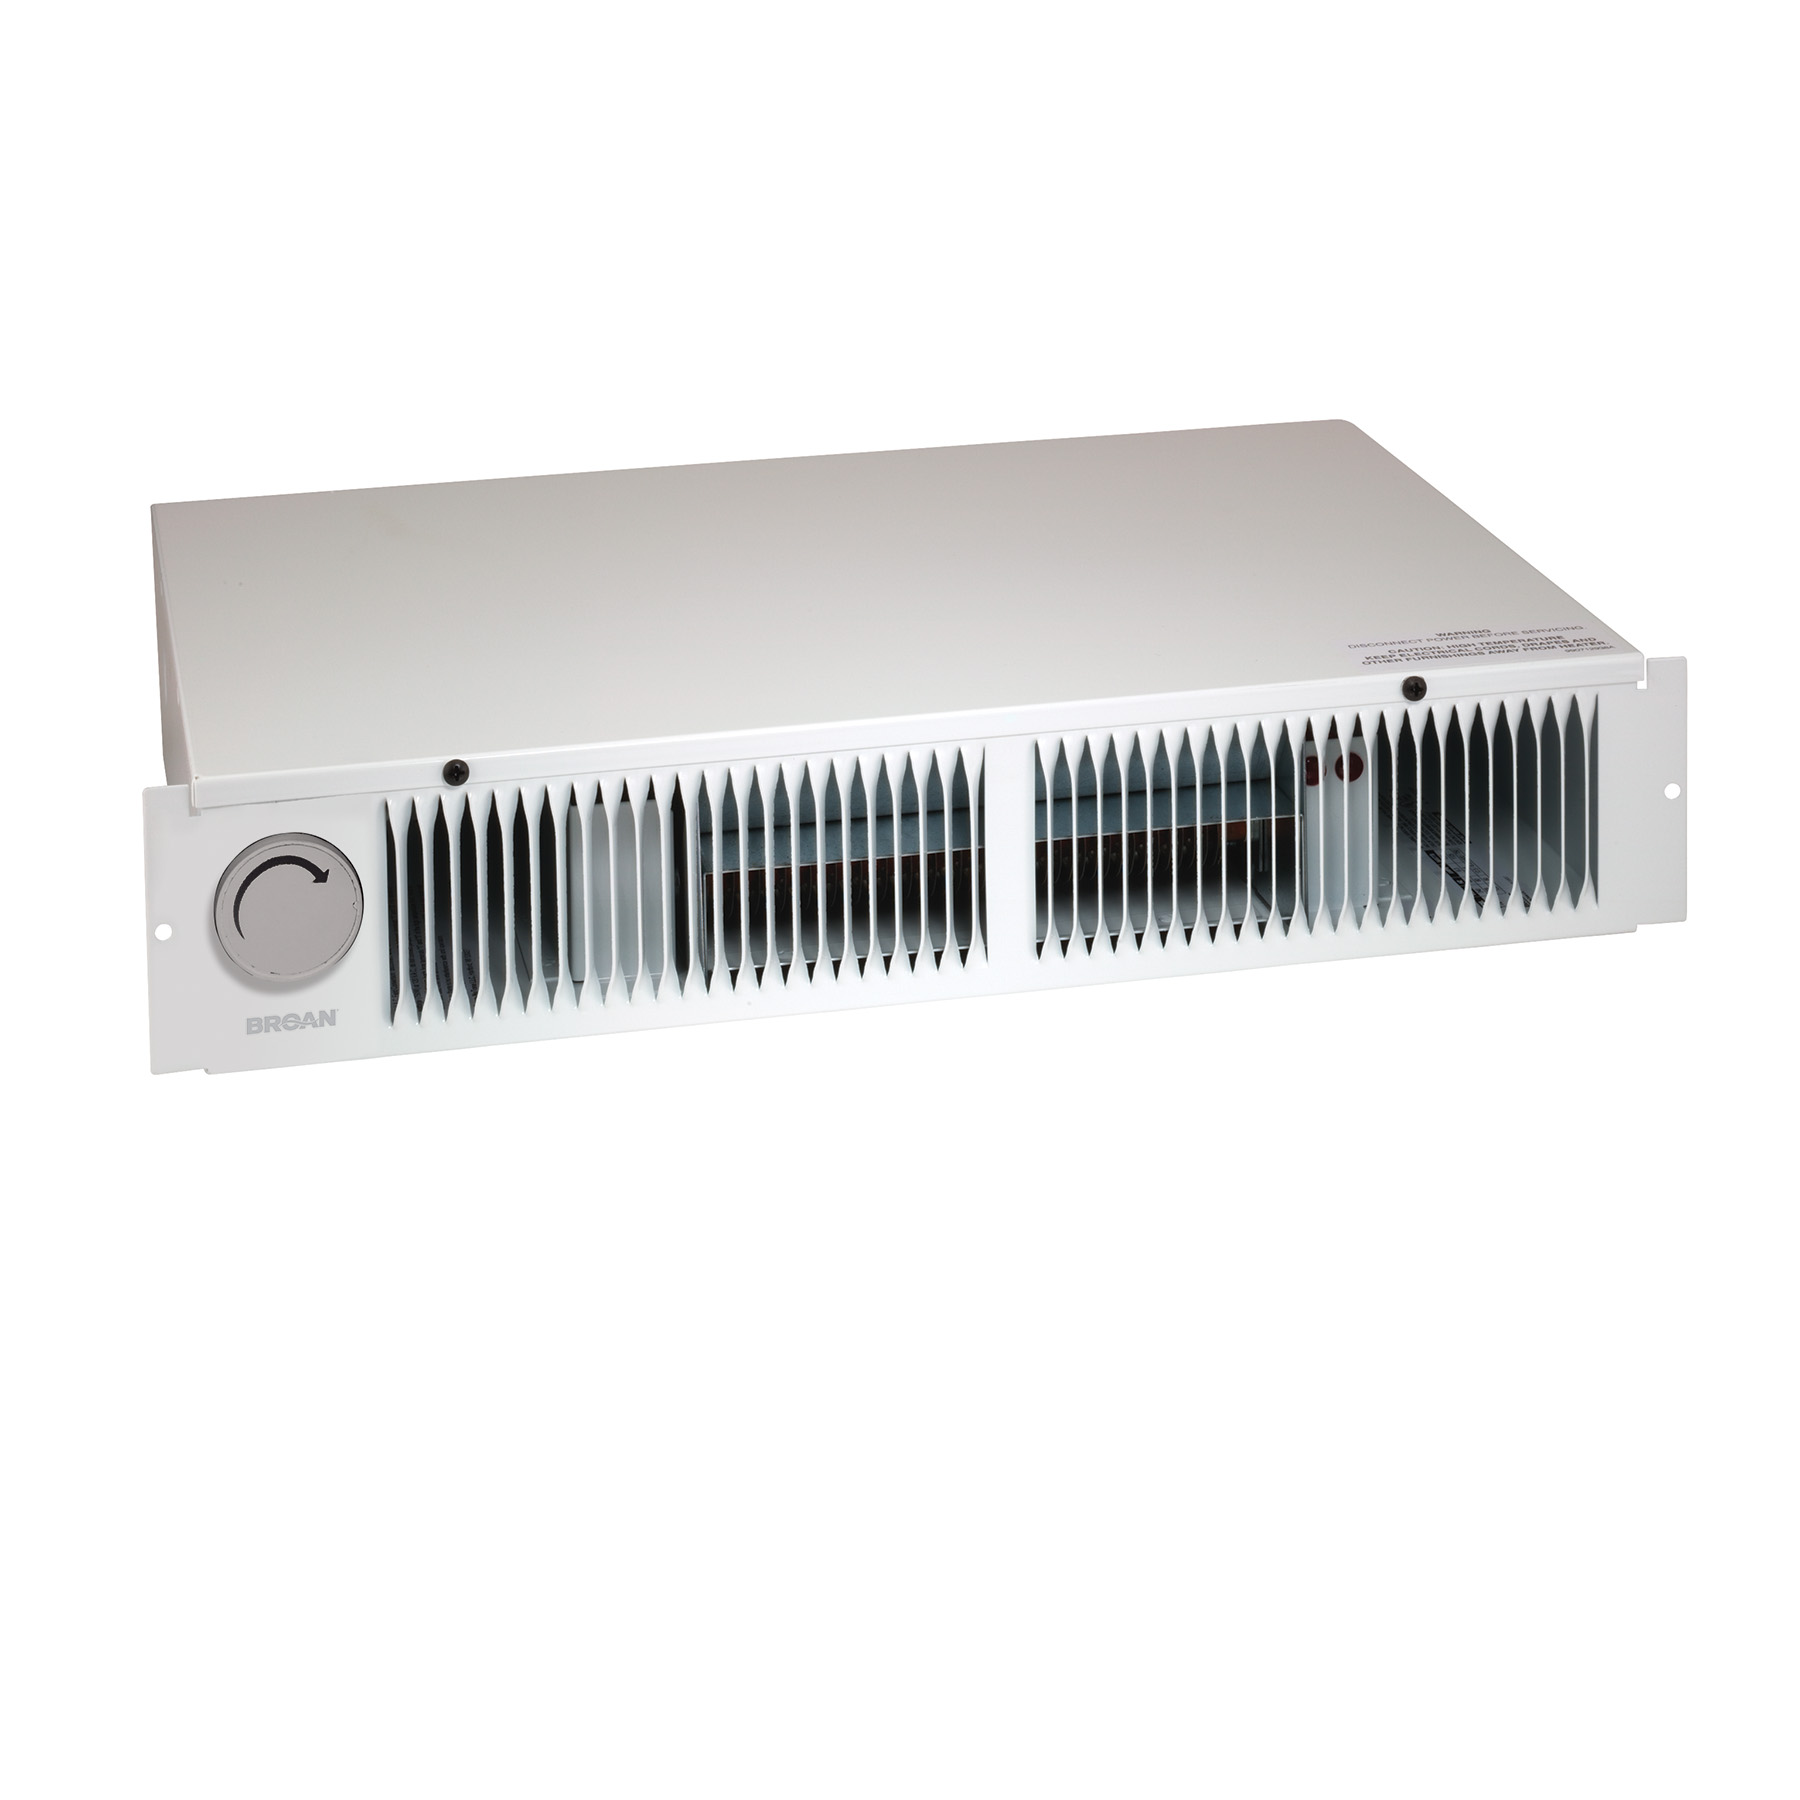 Built-In Adjustable Thermostat 1500W 120/240V White Broan-NuTone Grille Heater 